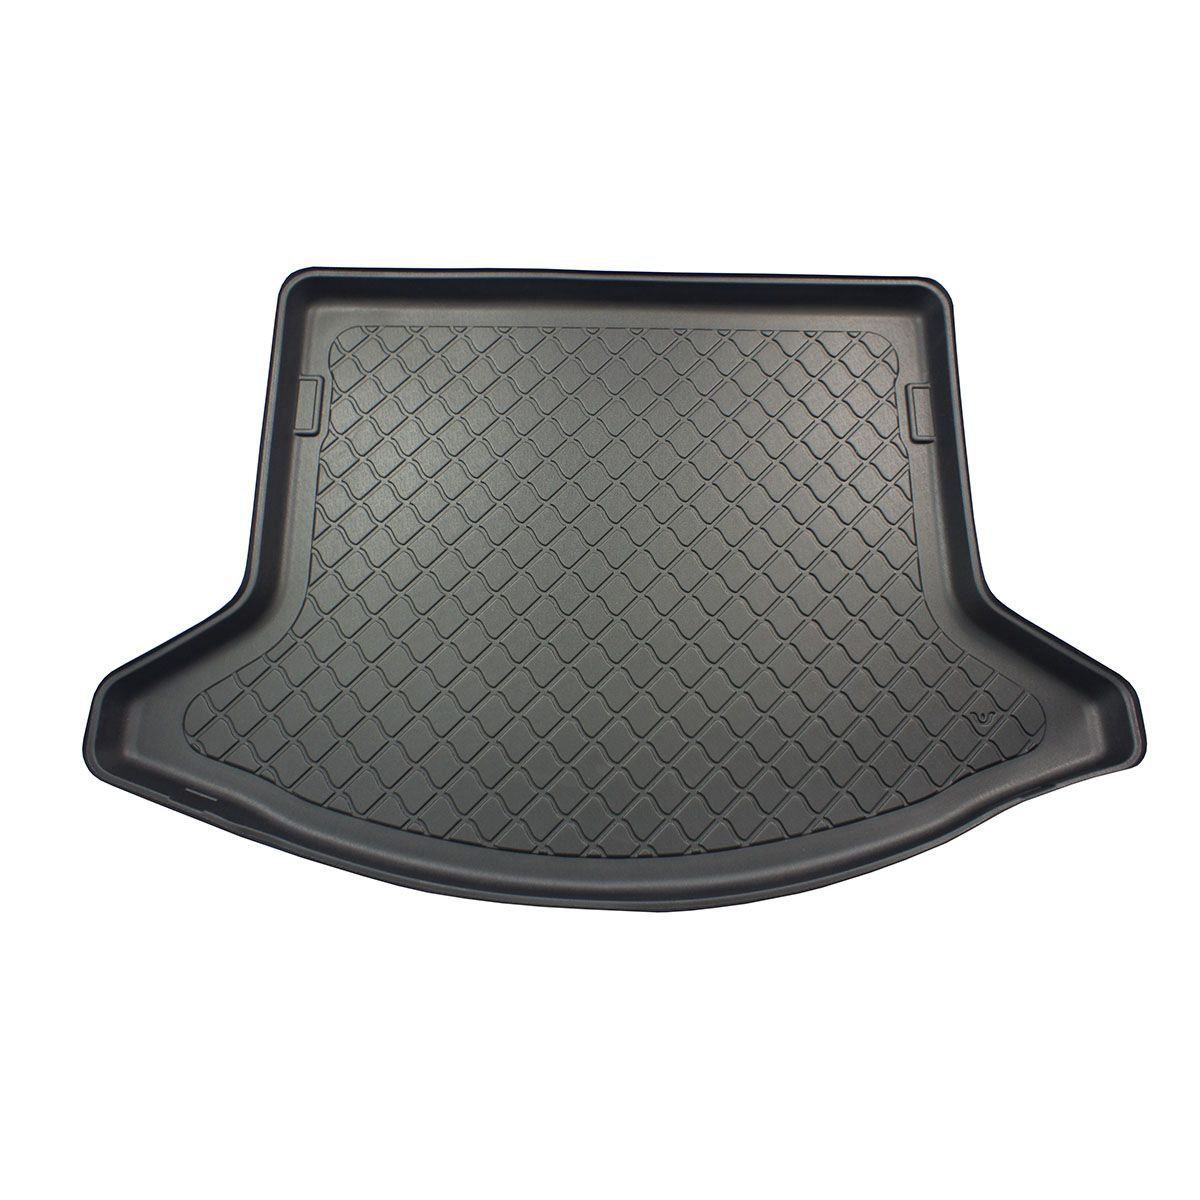 Mazda CX-5 2017 - Onwards Moulded Boot Mat product image